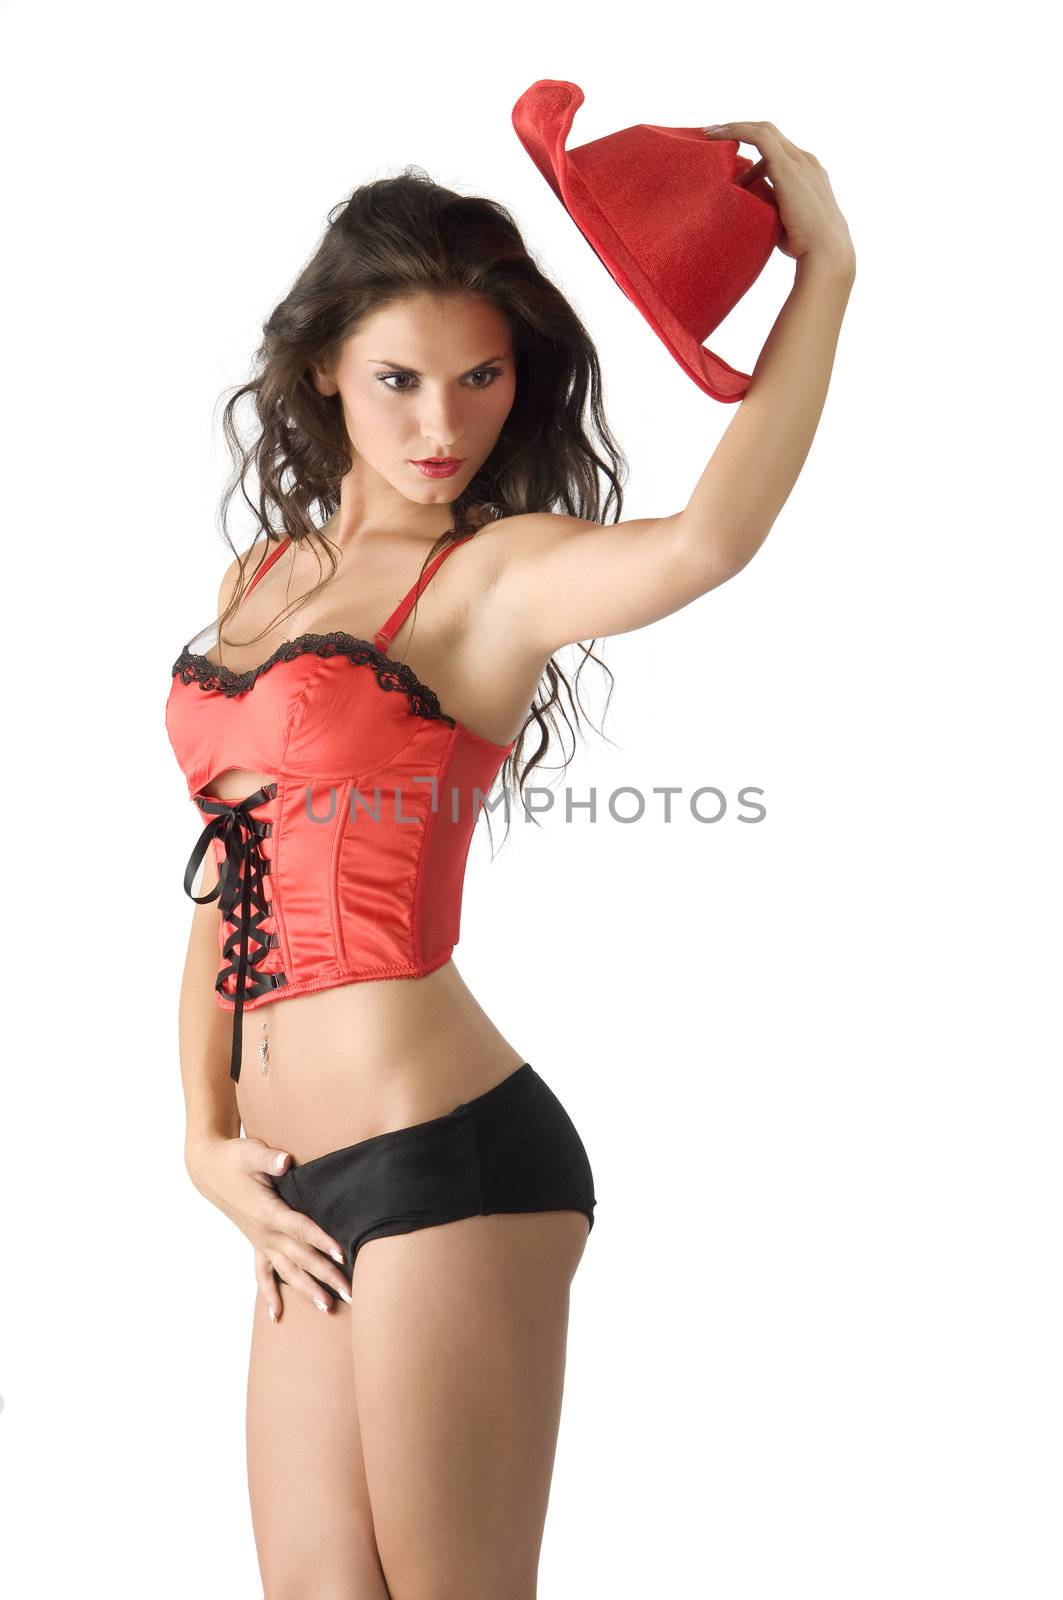 sexy brunette in red lingerie taking off a red hat